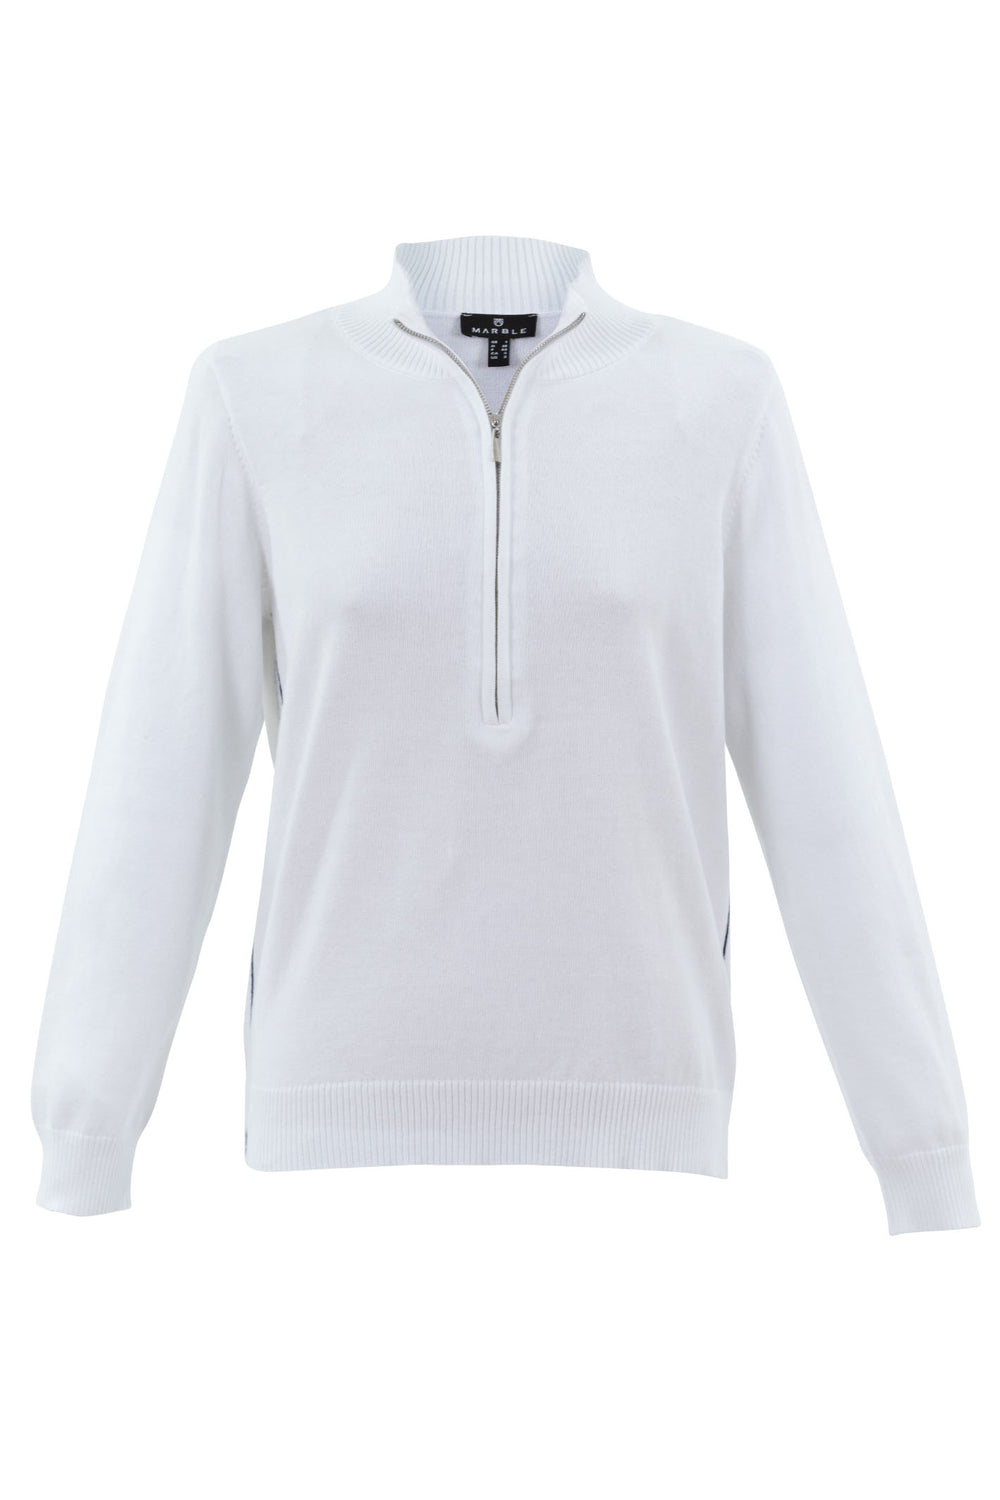 Marble Fashions 7441 102 White Zip Neck Jumper - Experience Boutique